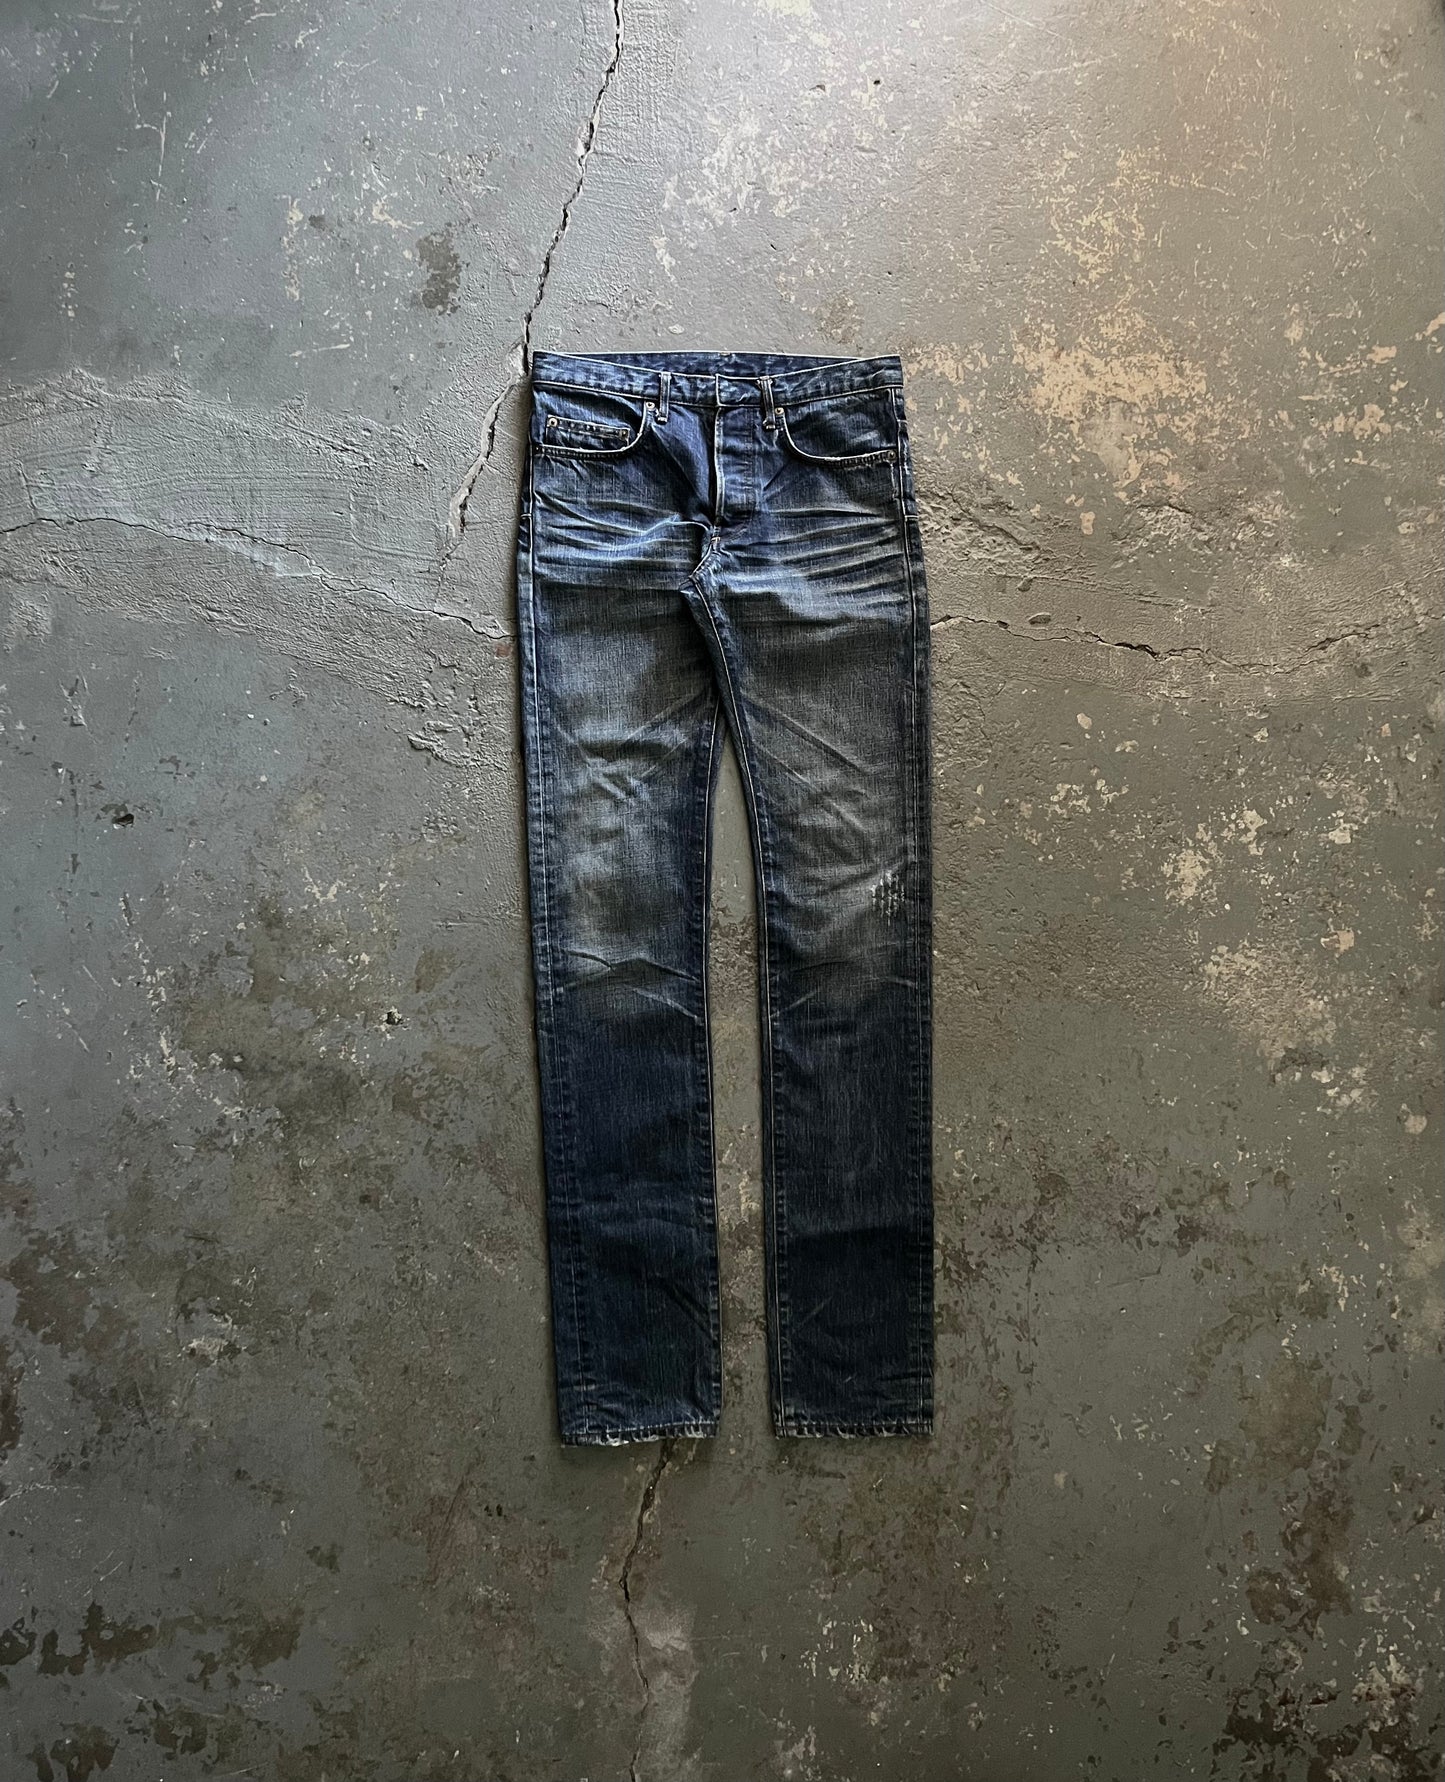 Dior AW05 “In The Morning” Clawmark Jeans